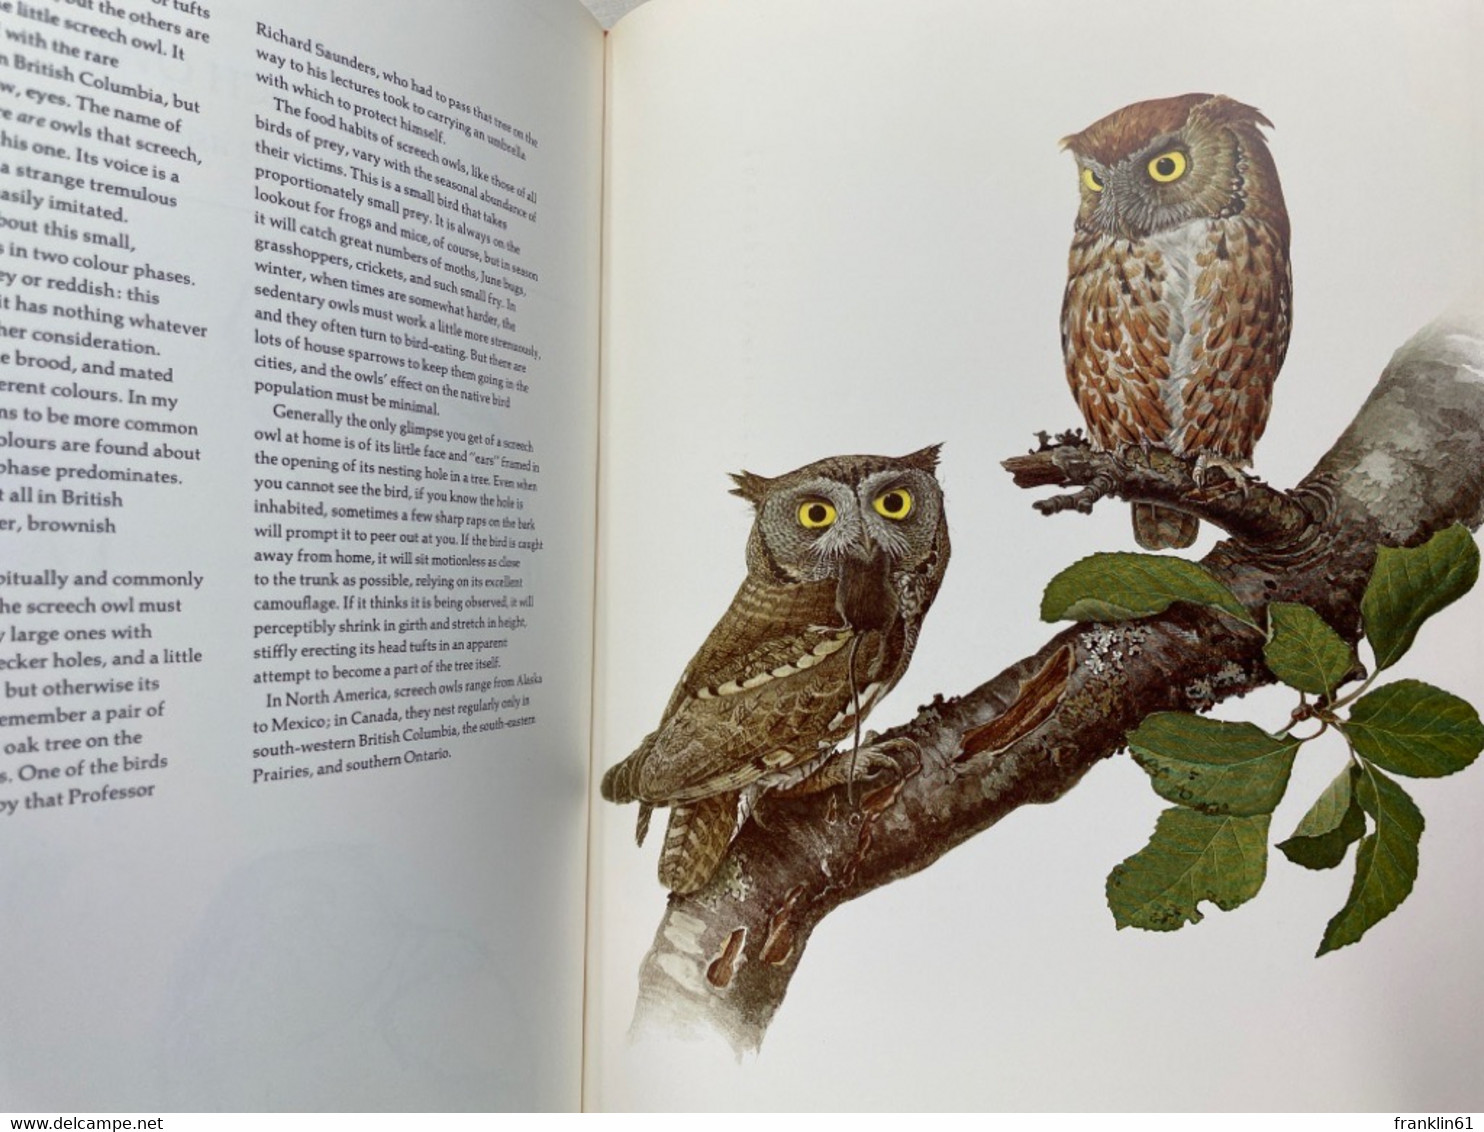 Lansdowne's Birds of the Forest. Birds of the Eastern Forest ( Volume 1 & 2 ) and Birds of the Northern Forest